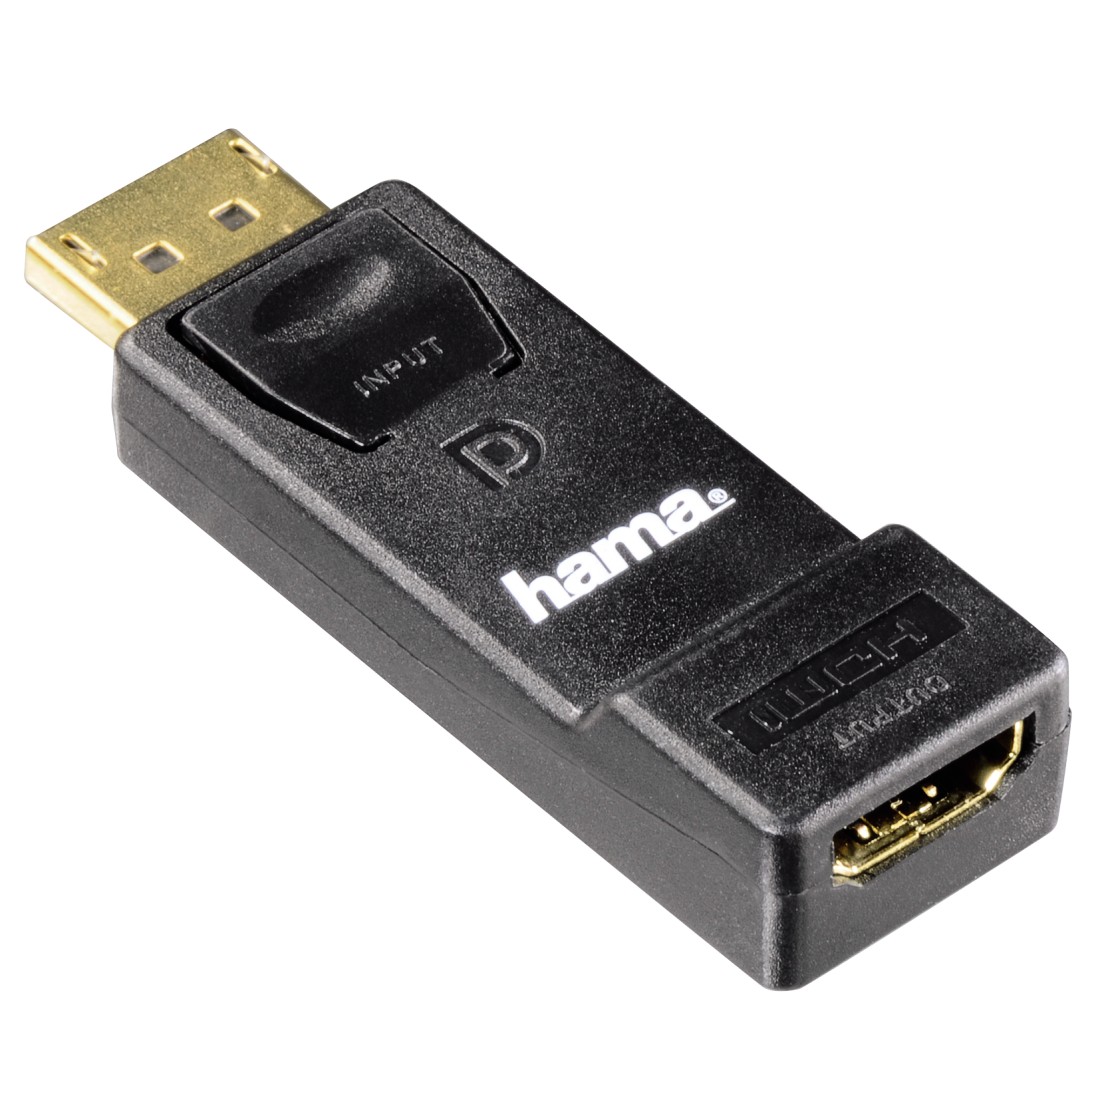  HighRes Image 2  Hama DisplayPort Adapter for HDMI Ultra HD